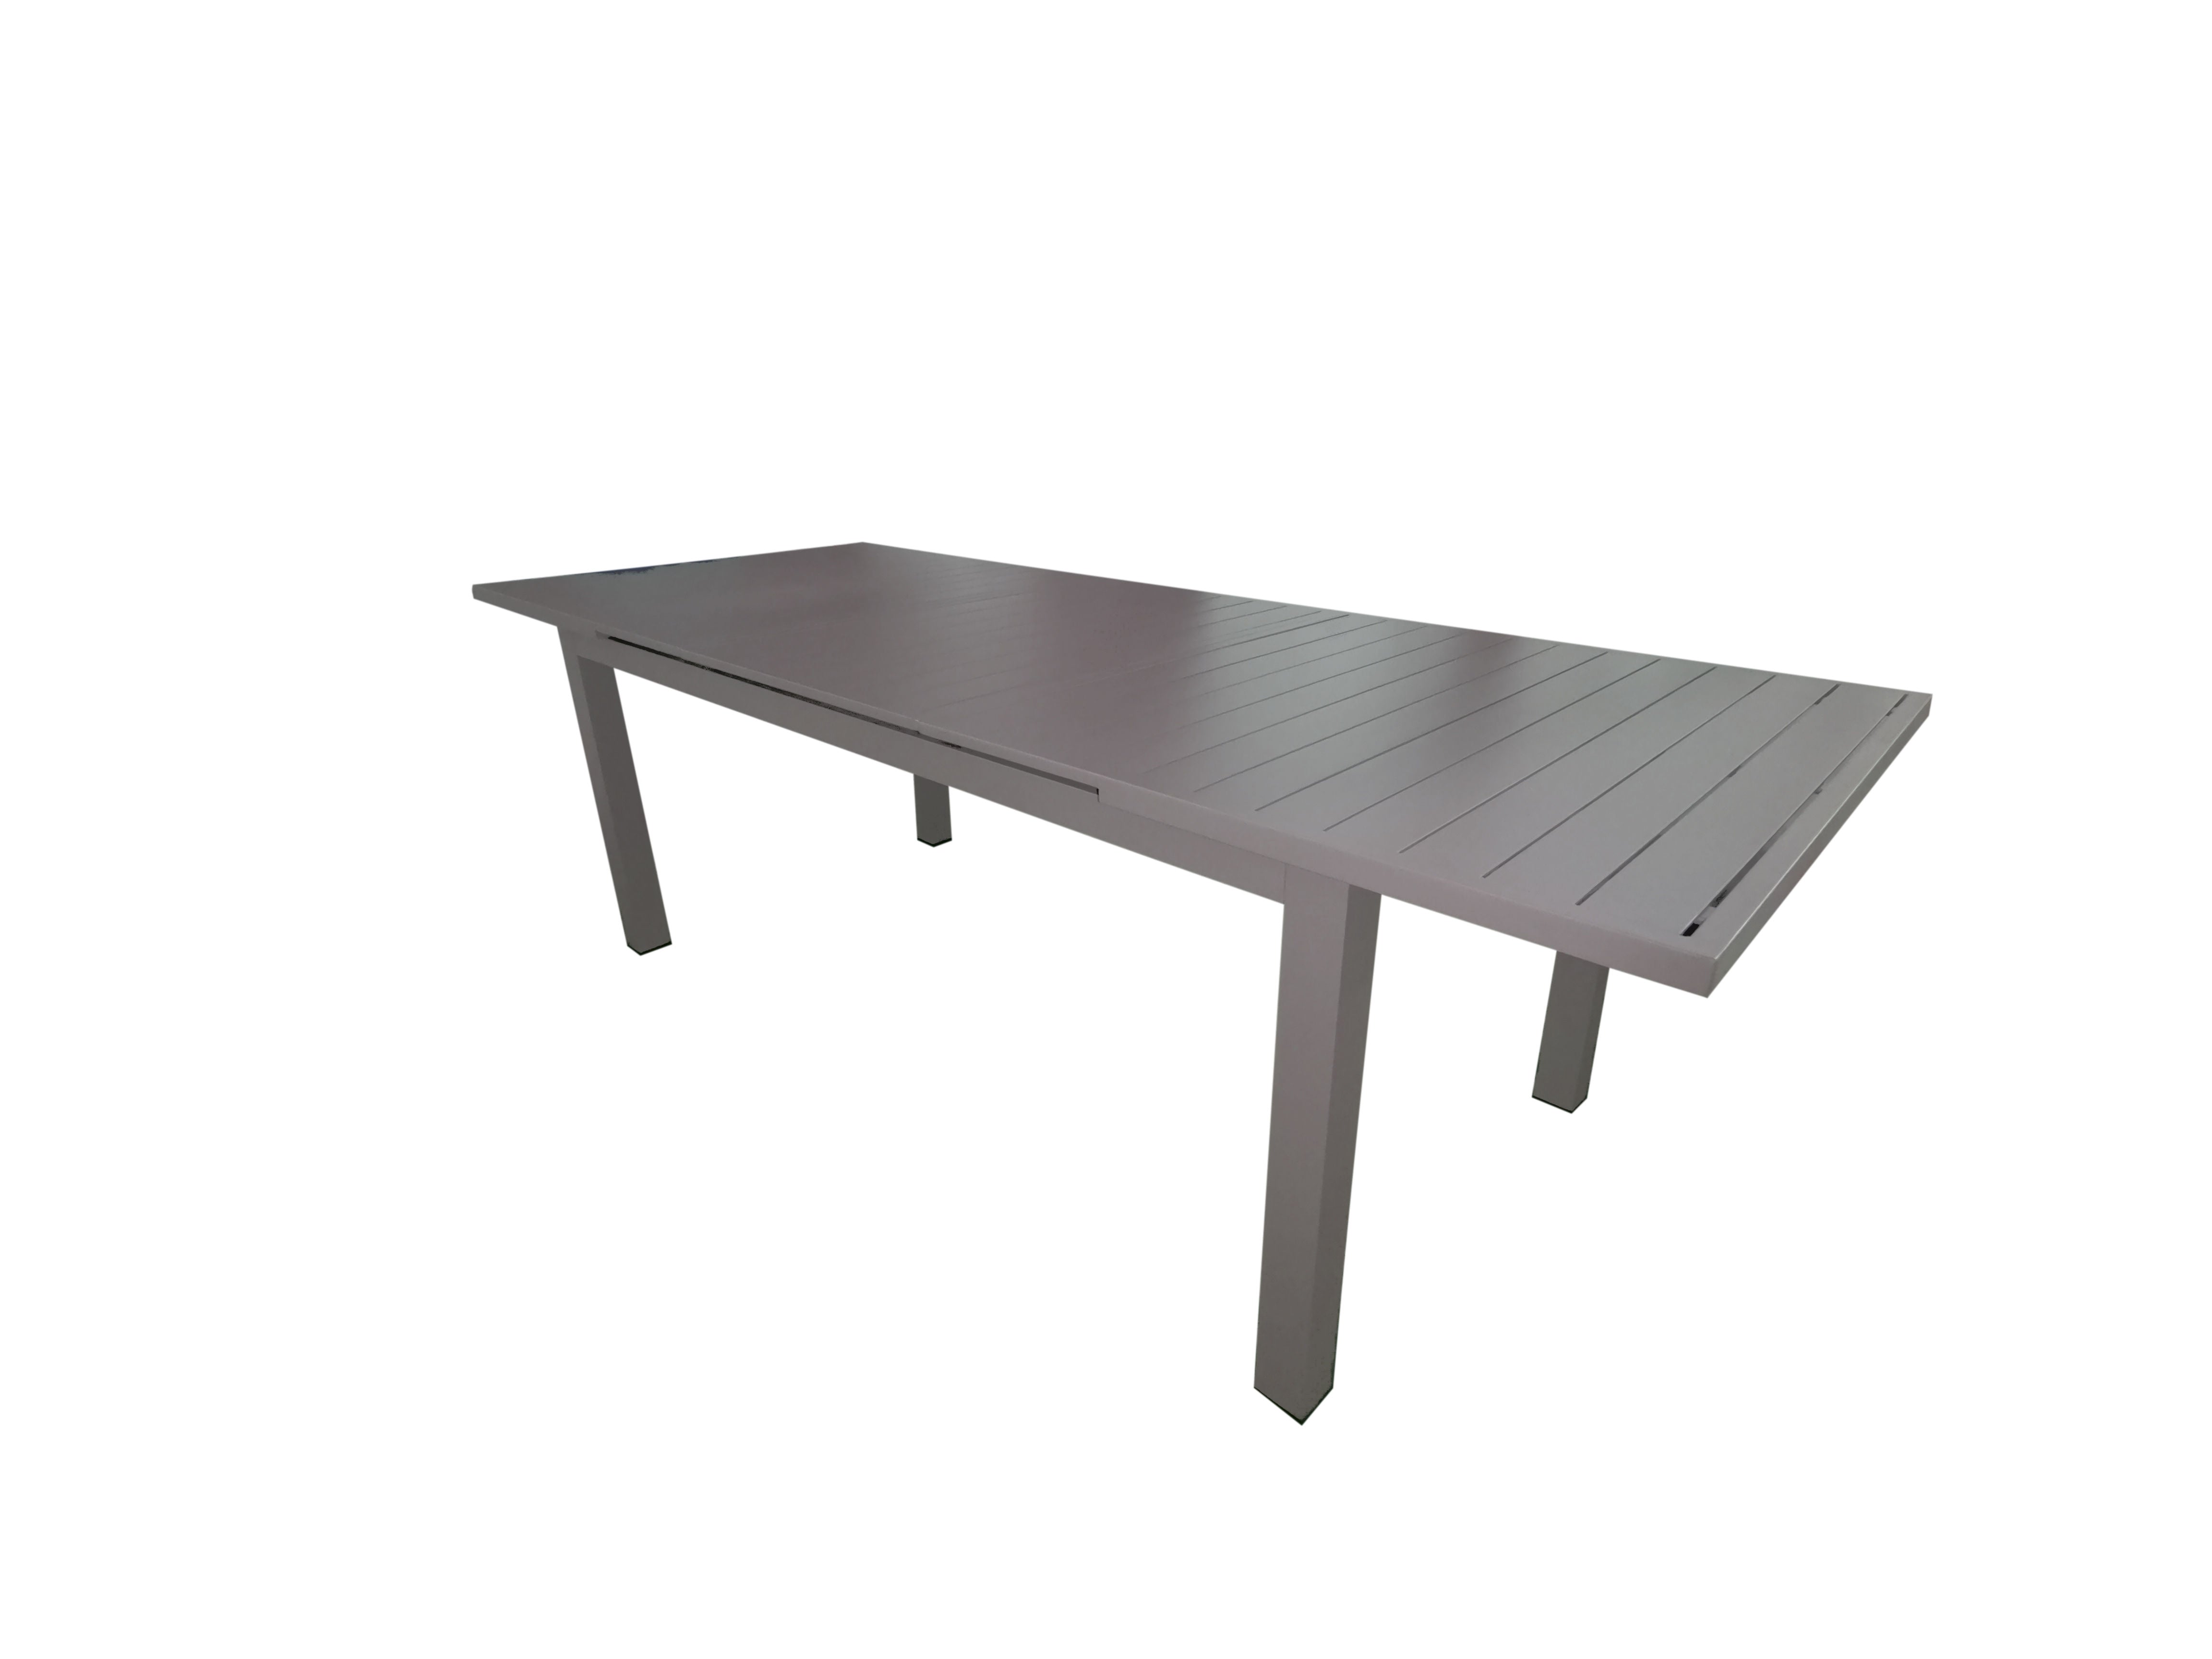 MOSS MOSS-T306TMA - Akumal Collection, Taupe matte extendable table with aluminum slats, tempered glass table top and up/down sliding mechanism 71"(95" with extension) x 39" x H 29.1"